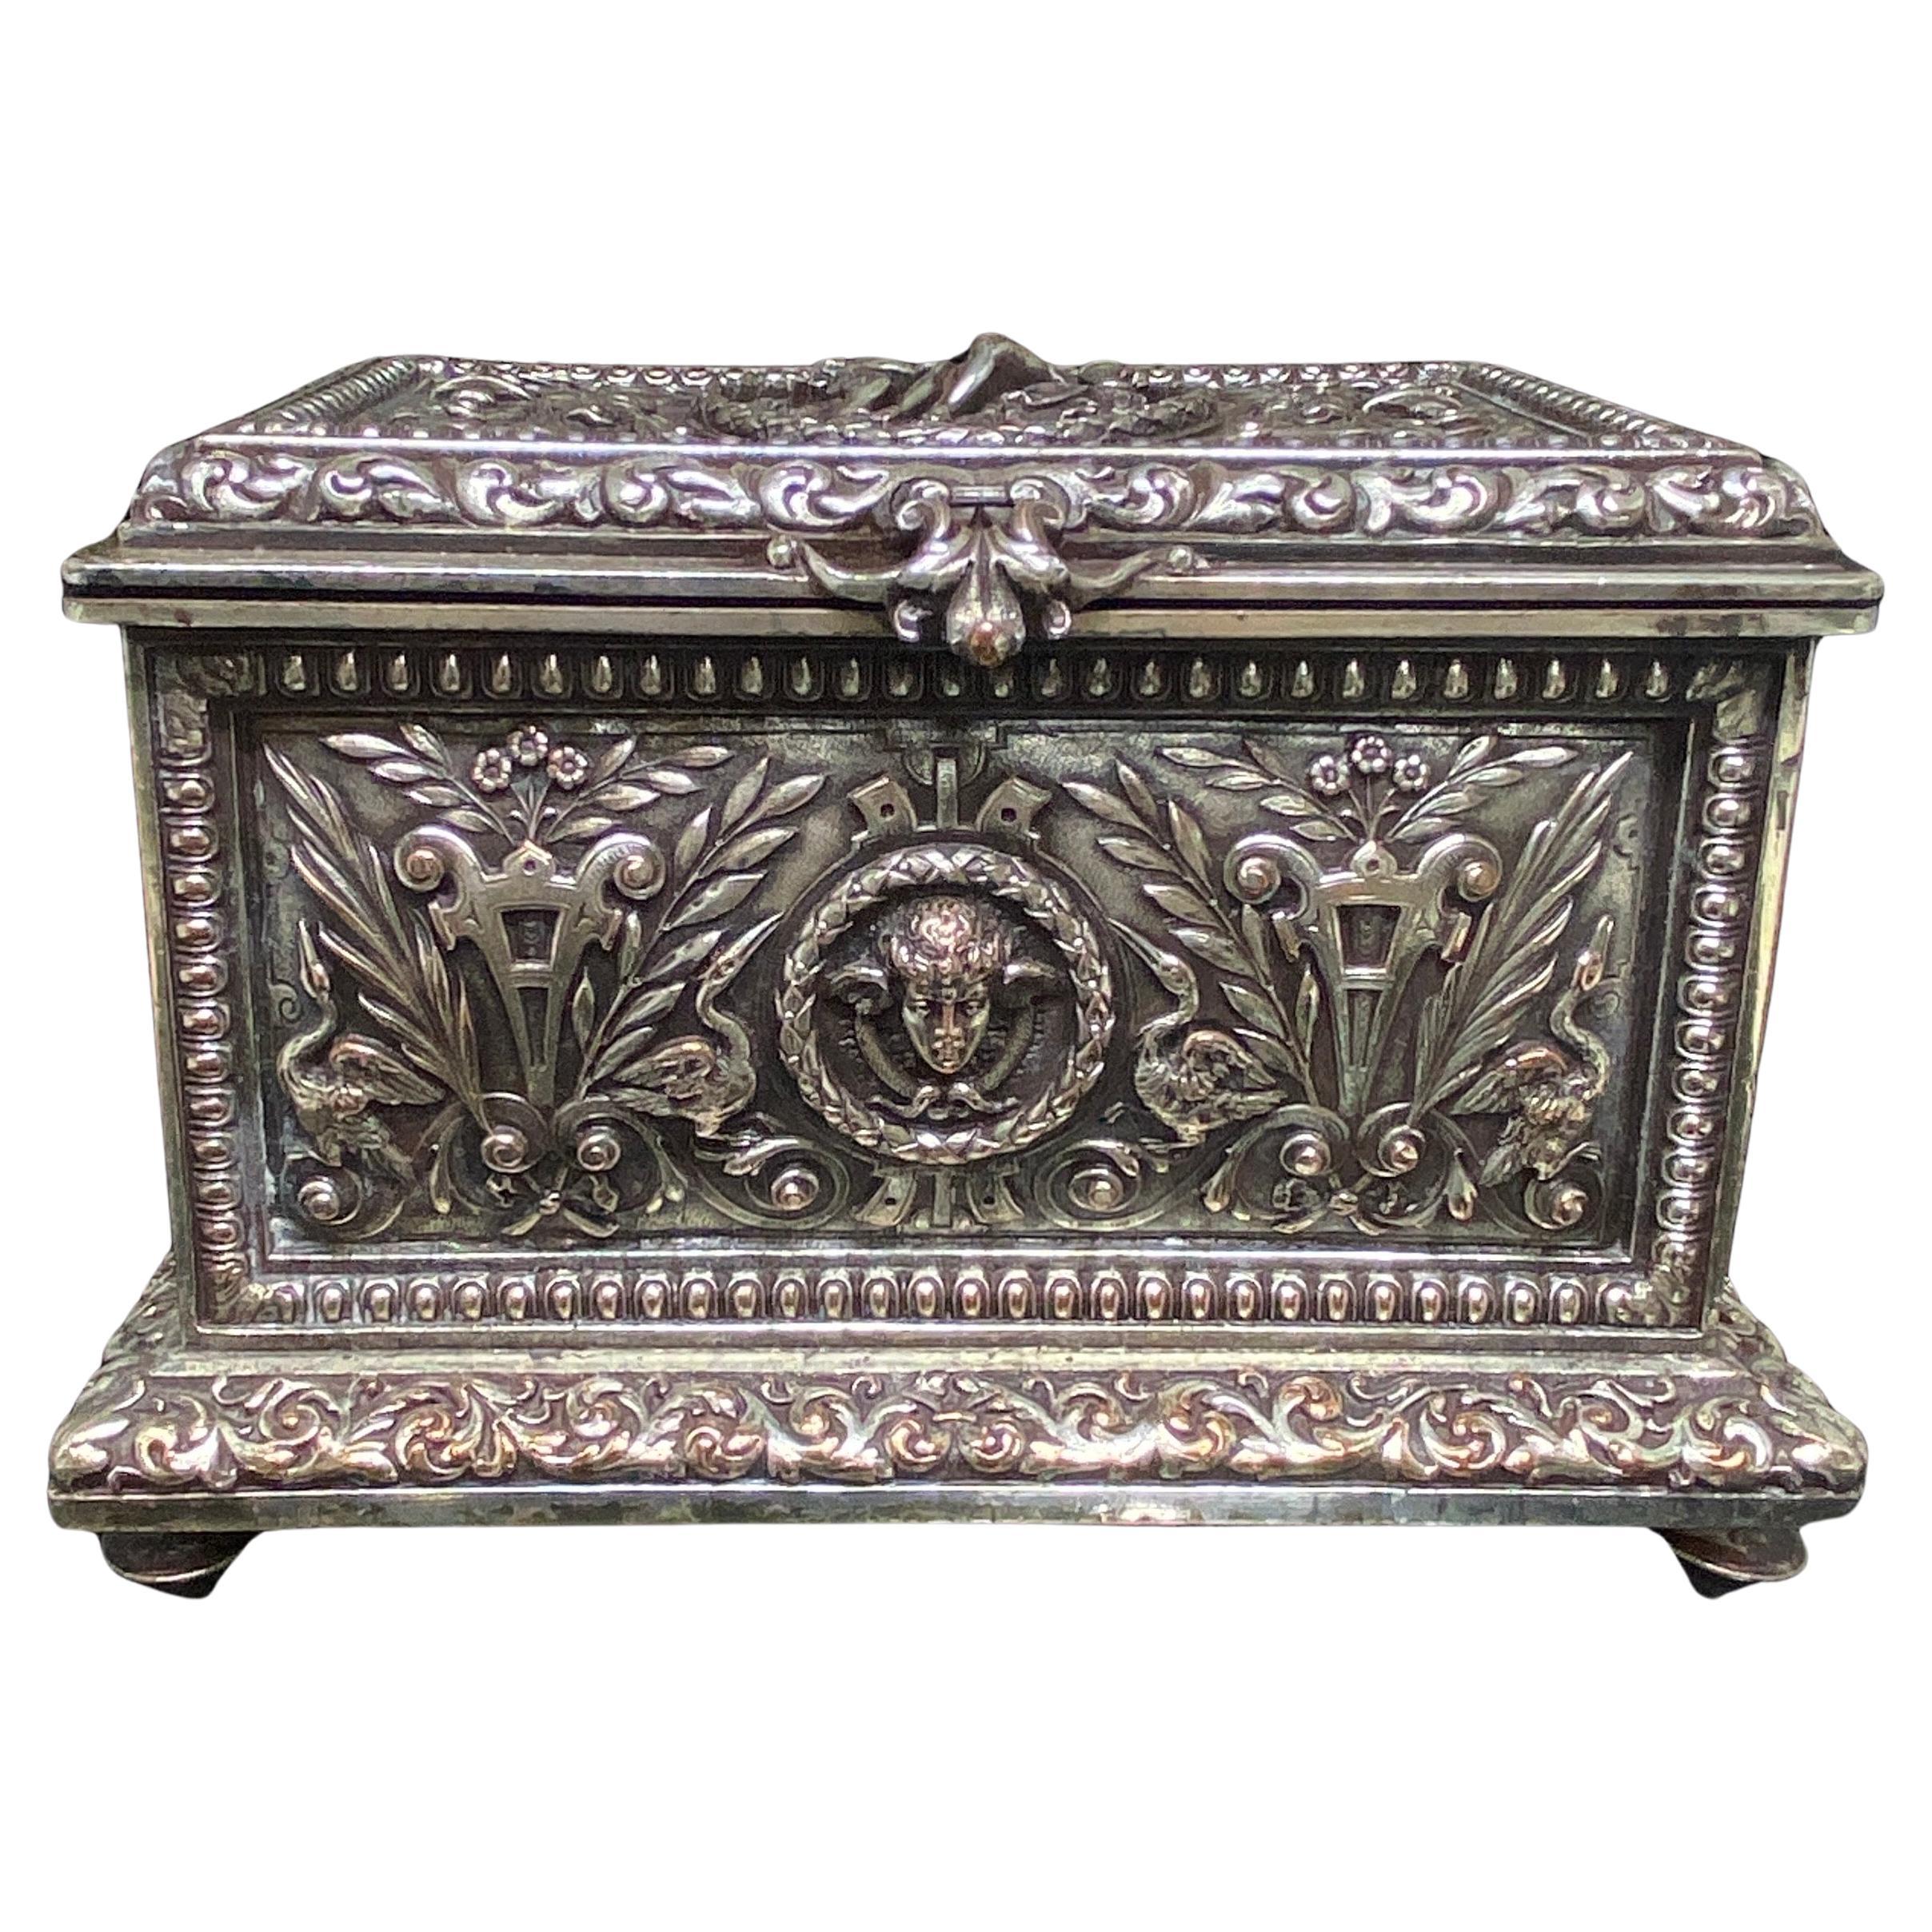 Up for your consideration is this impressive 19th century silverplated bronze trinket, jewelry box, cask.

It features an allover high relief neoclassical repouse design of winged caryatids, florals, urns, snakes, cherubs and egrets.  Each side is a